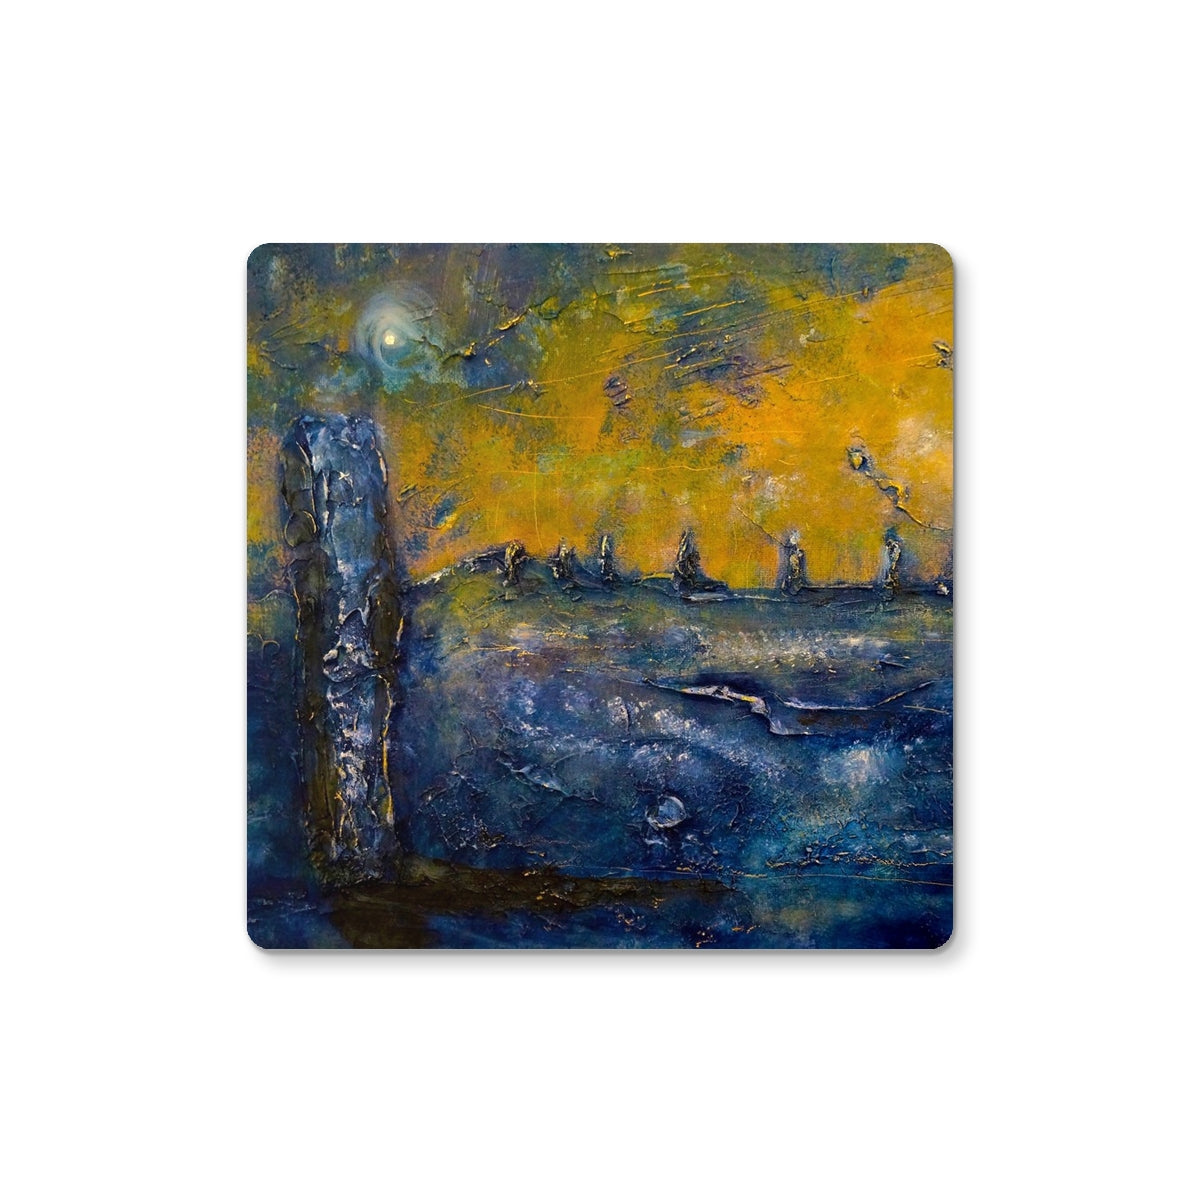 Brodgar Moonlight Orkney Art Gifts Coaster-Coasters-Orkney Art Gallery-6 Coasters-Paintings, Prints, Homeware, Art Gifts From Scotland By Scottish Artist Kevin Hunter